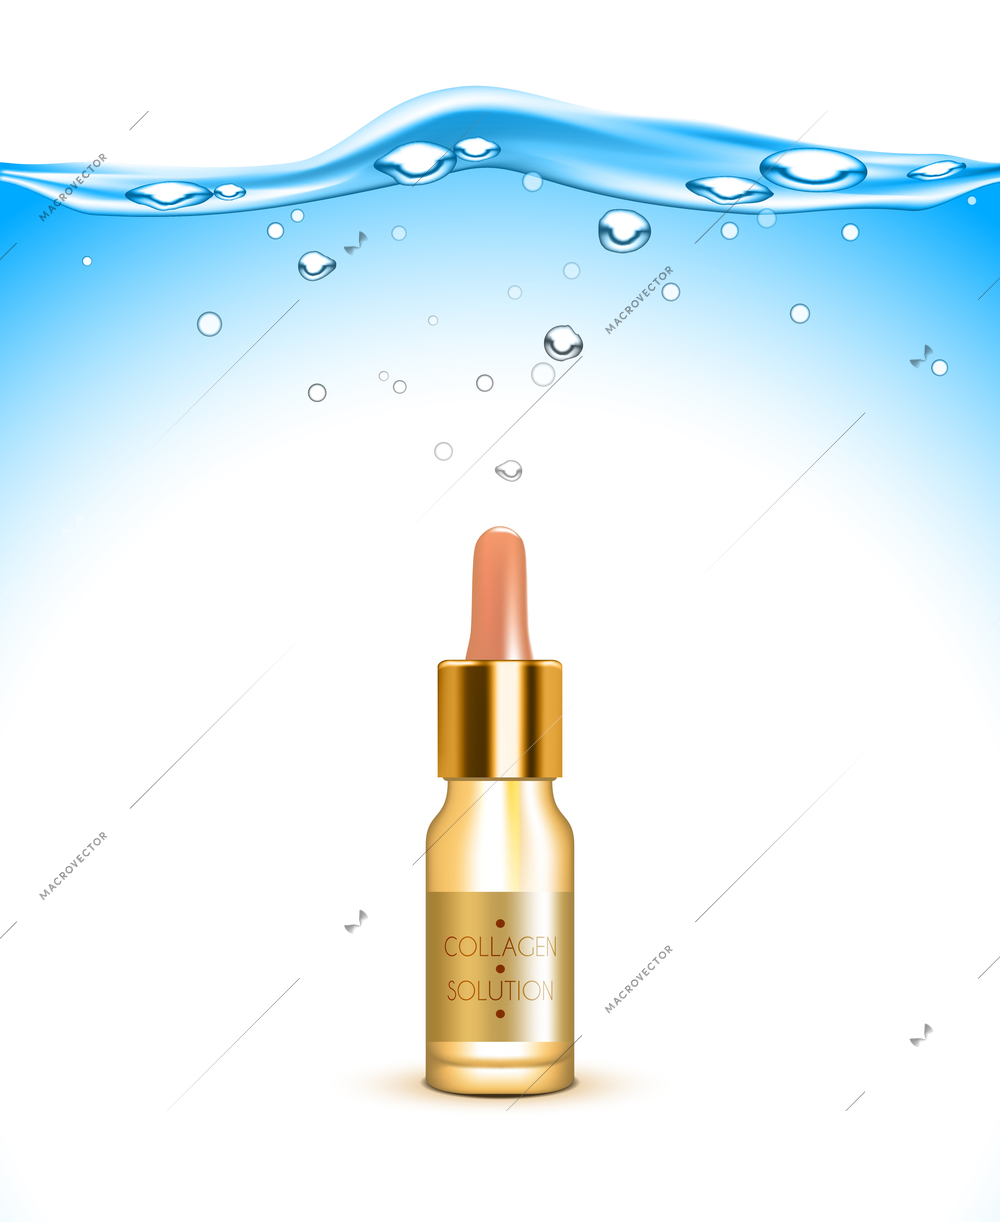 Collagen solution hydrating and moisturizing skin care cosmetic product advertisement with water background poster realistic vector illustration